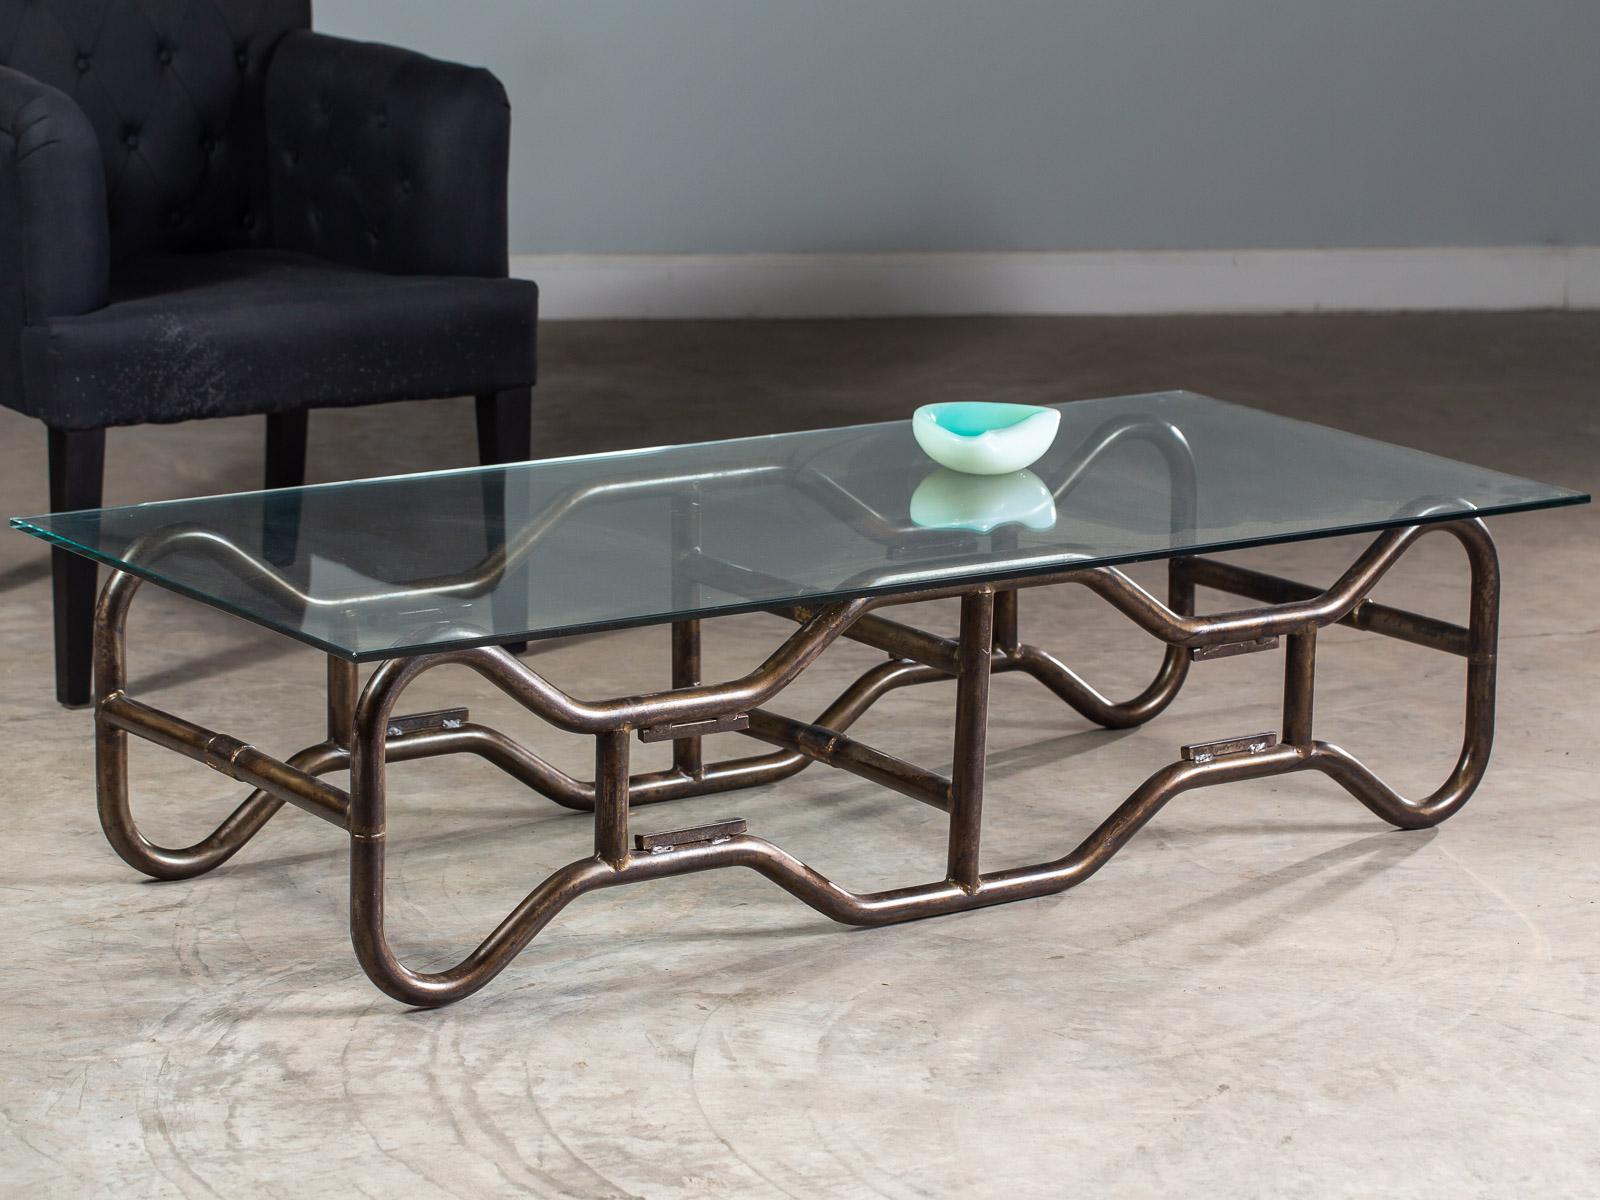 Modern French Industrial Steel Frame Glass Top Coffee Table, circa 1970 For Sale 9